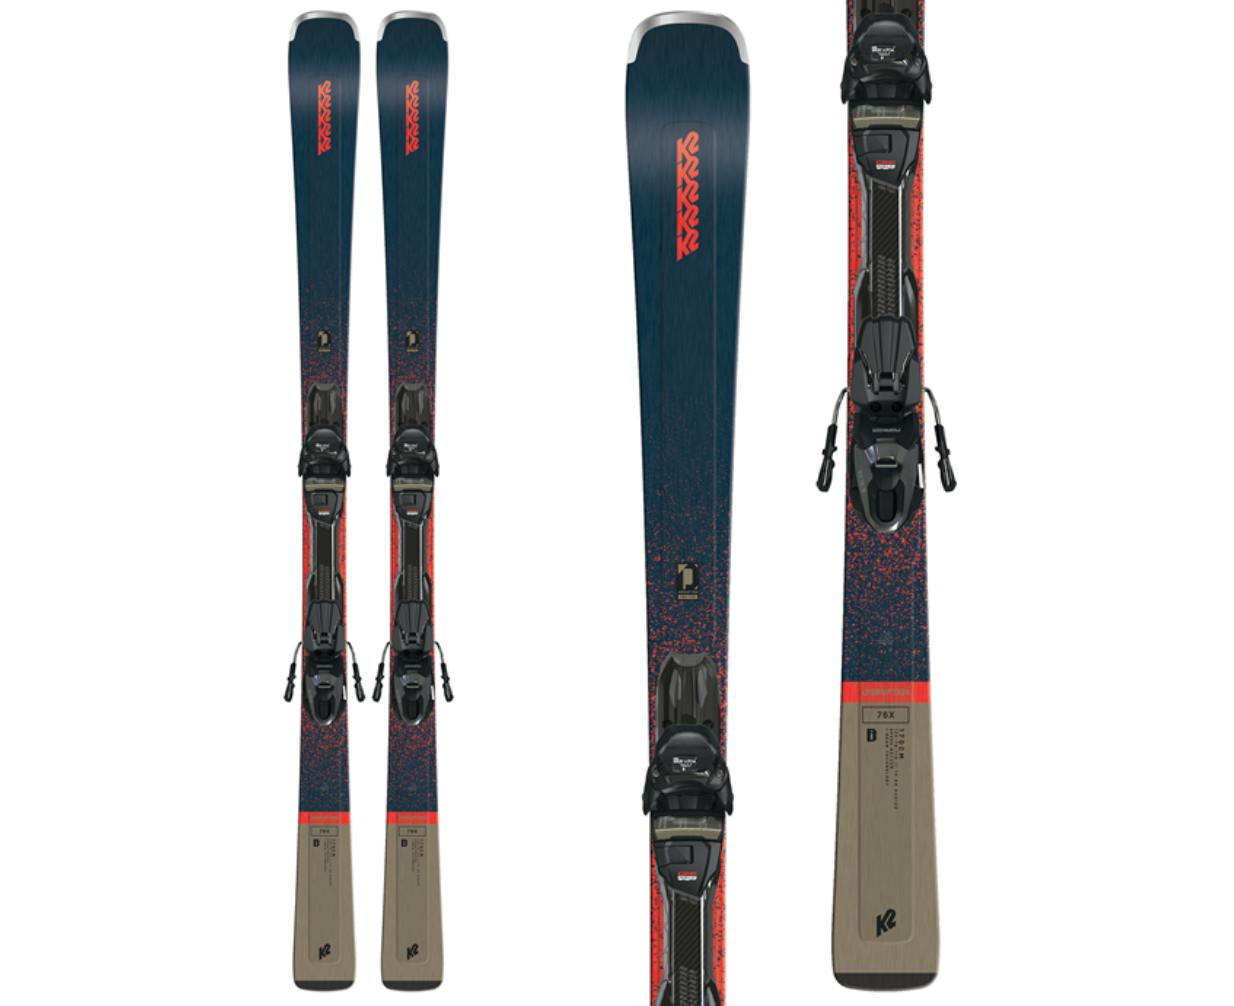 The The K2 Disruption 76 Skis. 